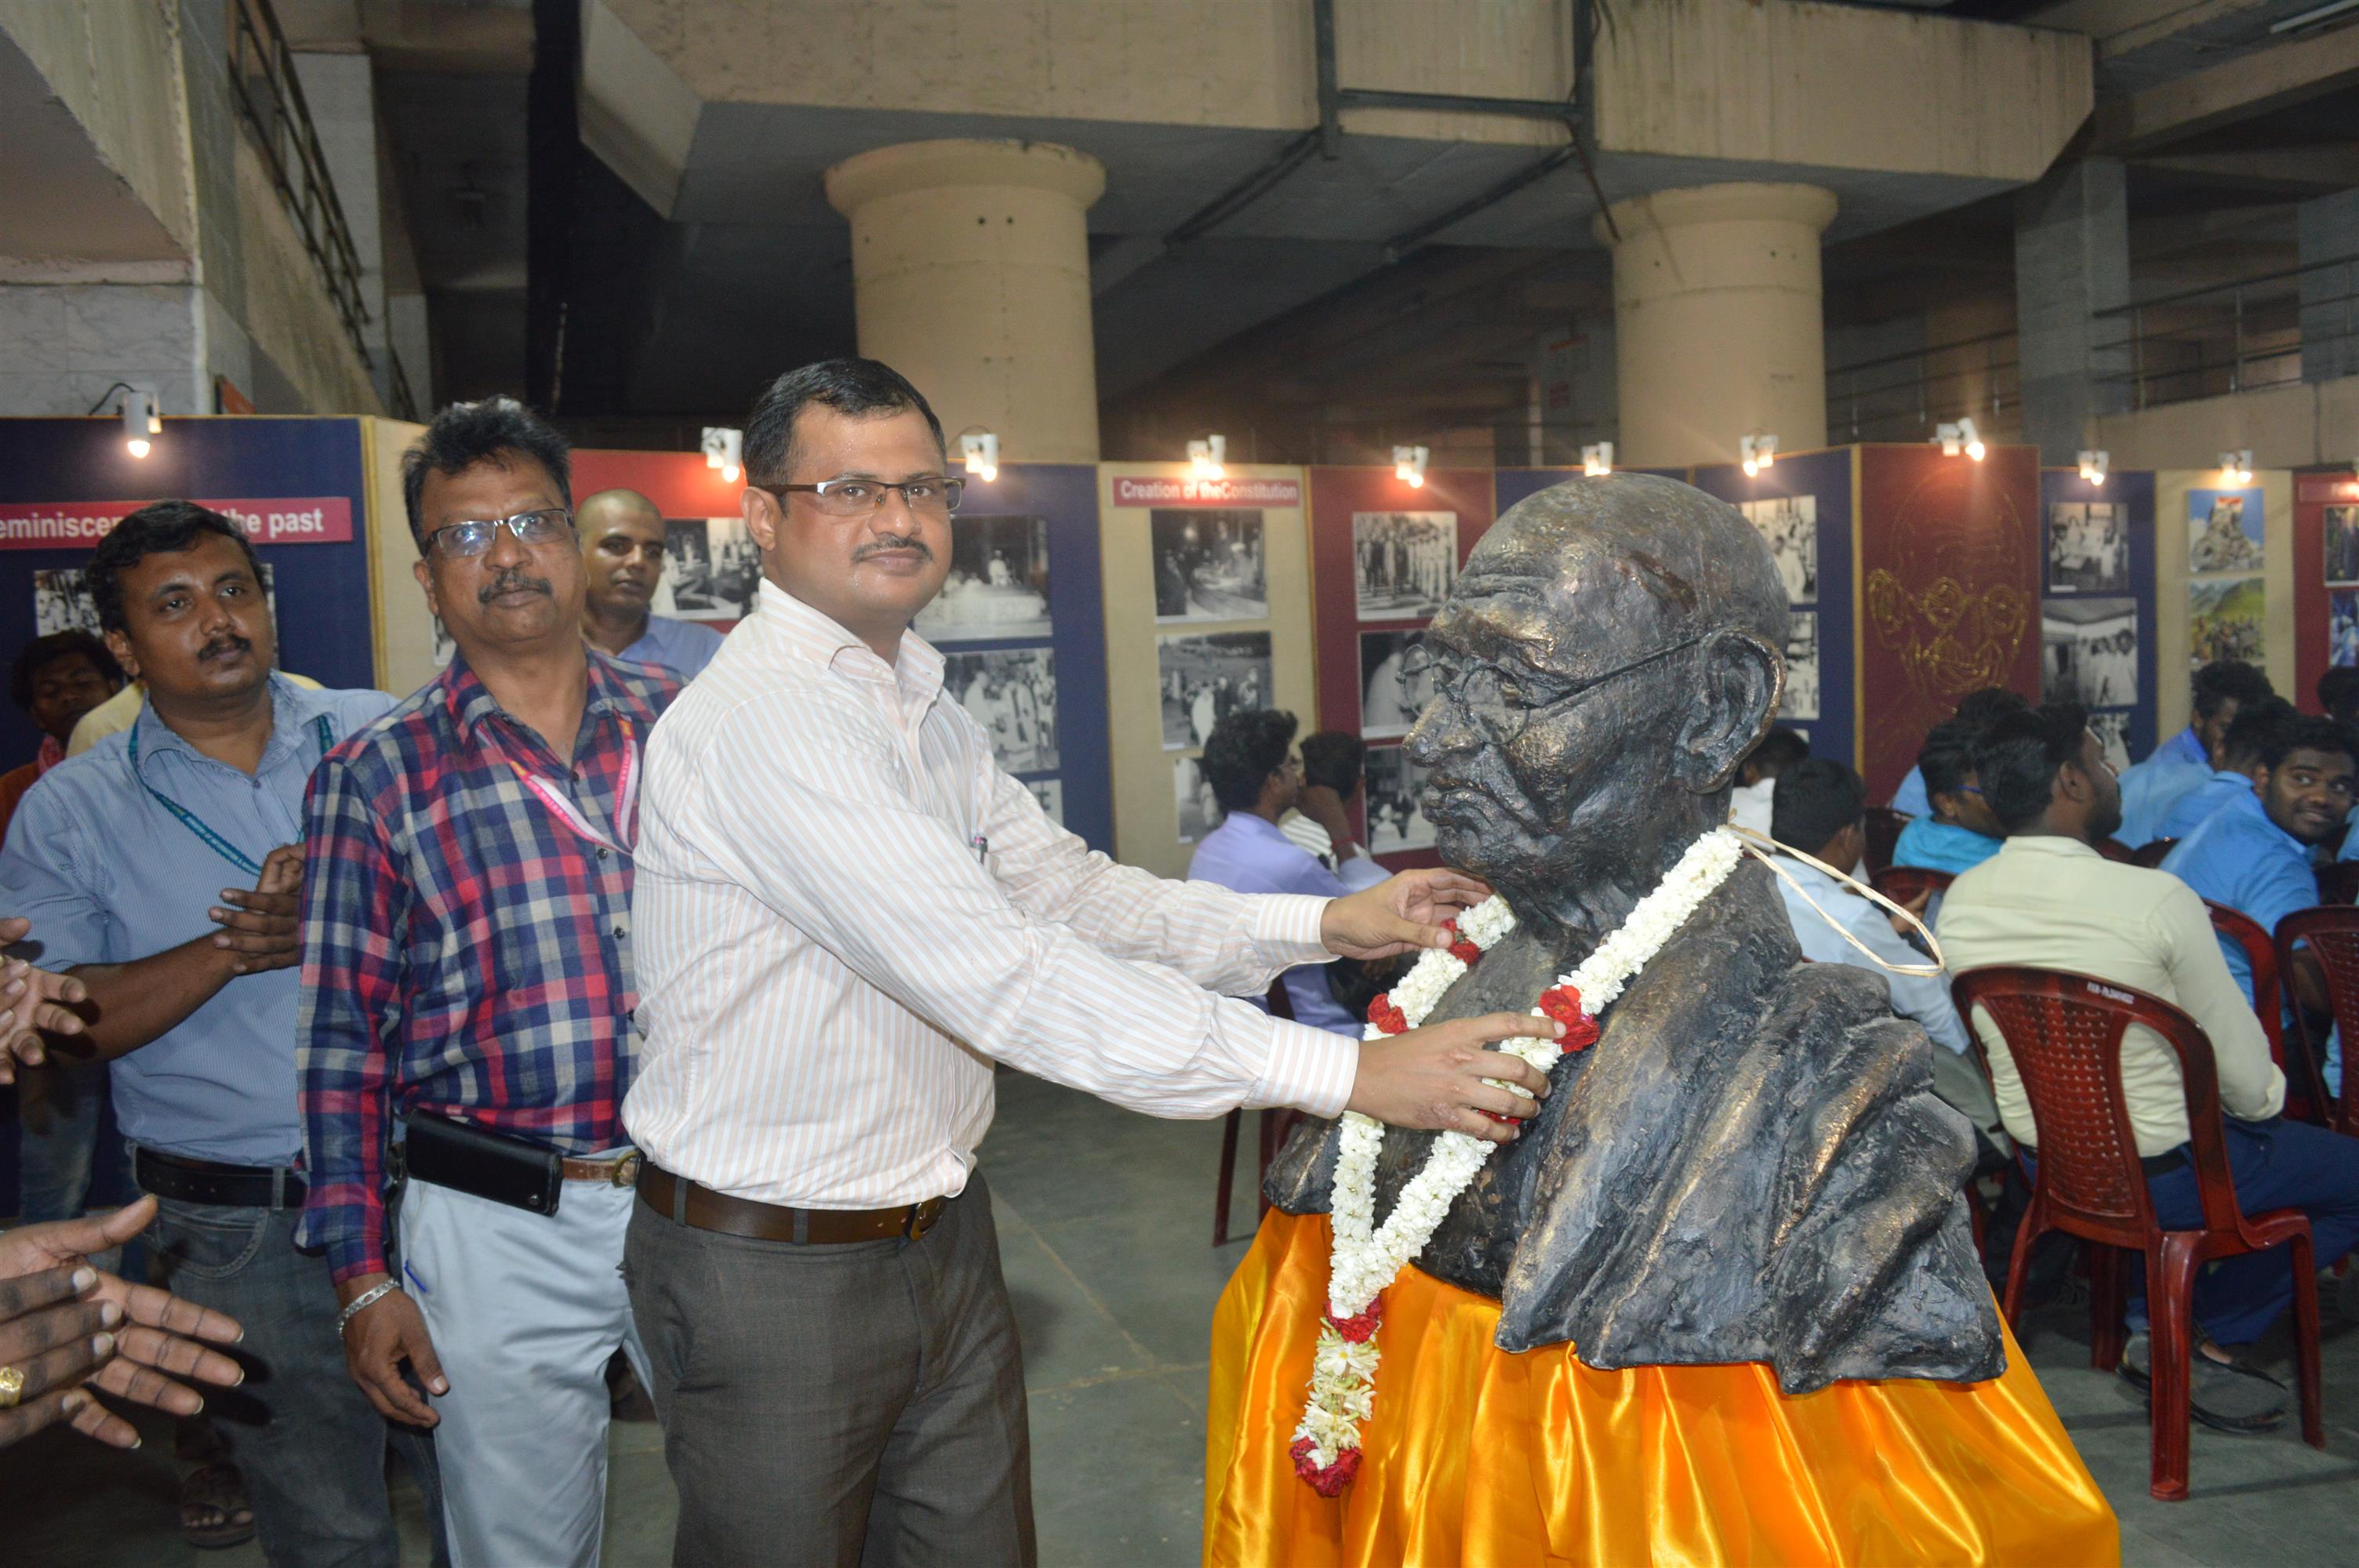 Shri. P.K. Ashok Babu, IFS, Regional Passport Officer paying tributes to Mahatma Gandhi during the Special awareness camp on 150th Birth Anniversary of Mahatma Gandhi, 73rd Independence Day and Quit India Movement organized by the Regional Outreach Bureau, Ministry of Information & Broadcasting in Chennai today (13.08.2019).